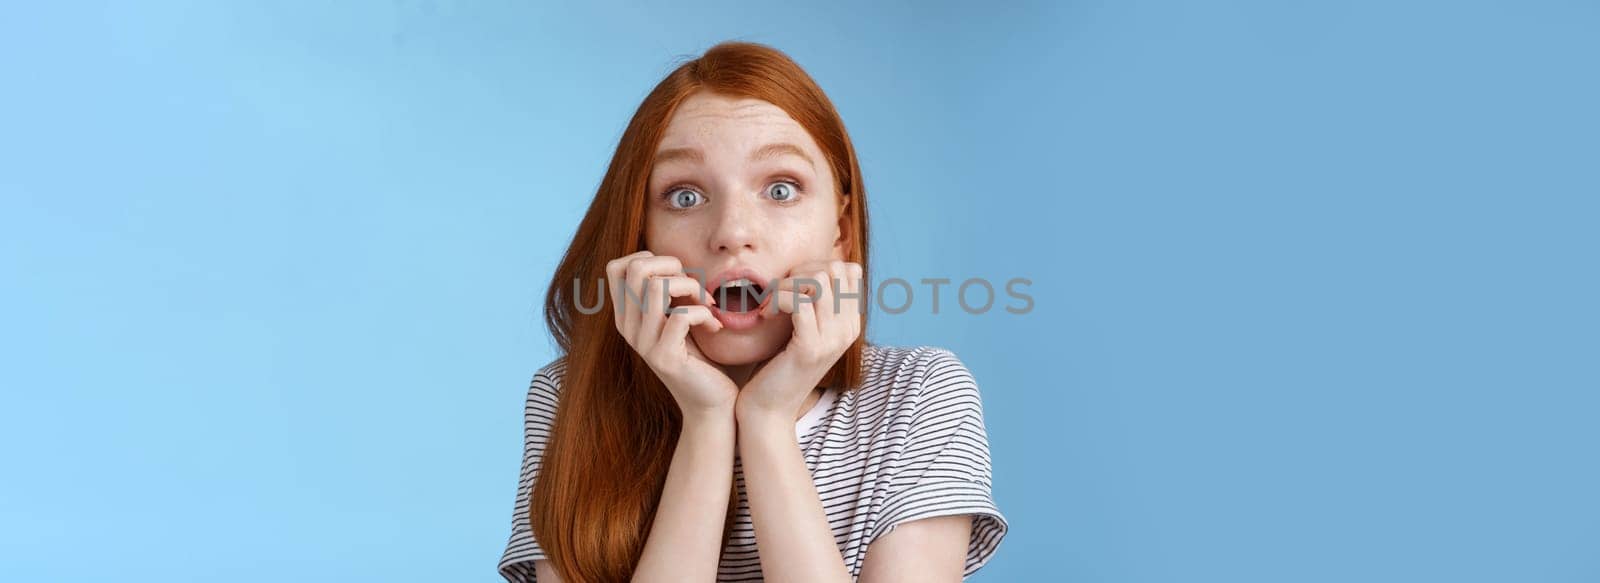 Shocked speechless gasping young redhead girl staring impressed stunned watching important moment tv series biting fingers open mouth shook standing excited blue background anticipating.